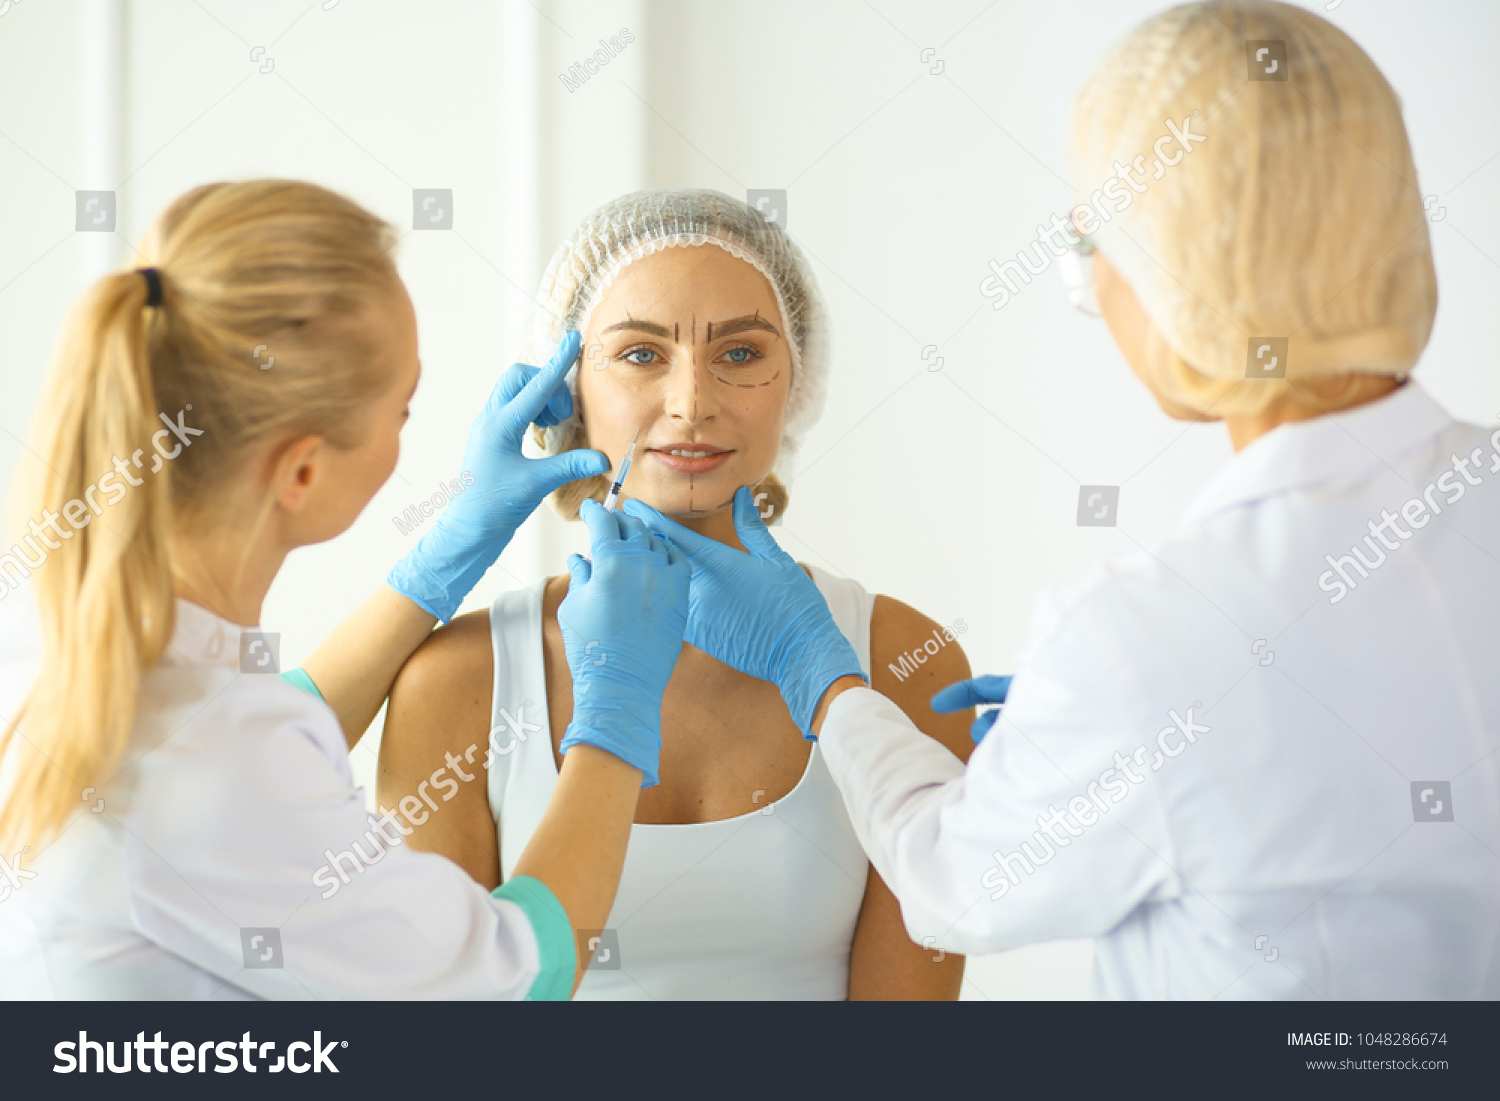 woman getting injection. beauty injections and cosmetology #1048286674